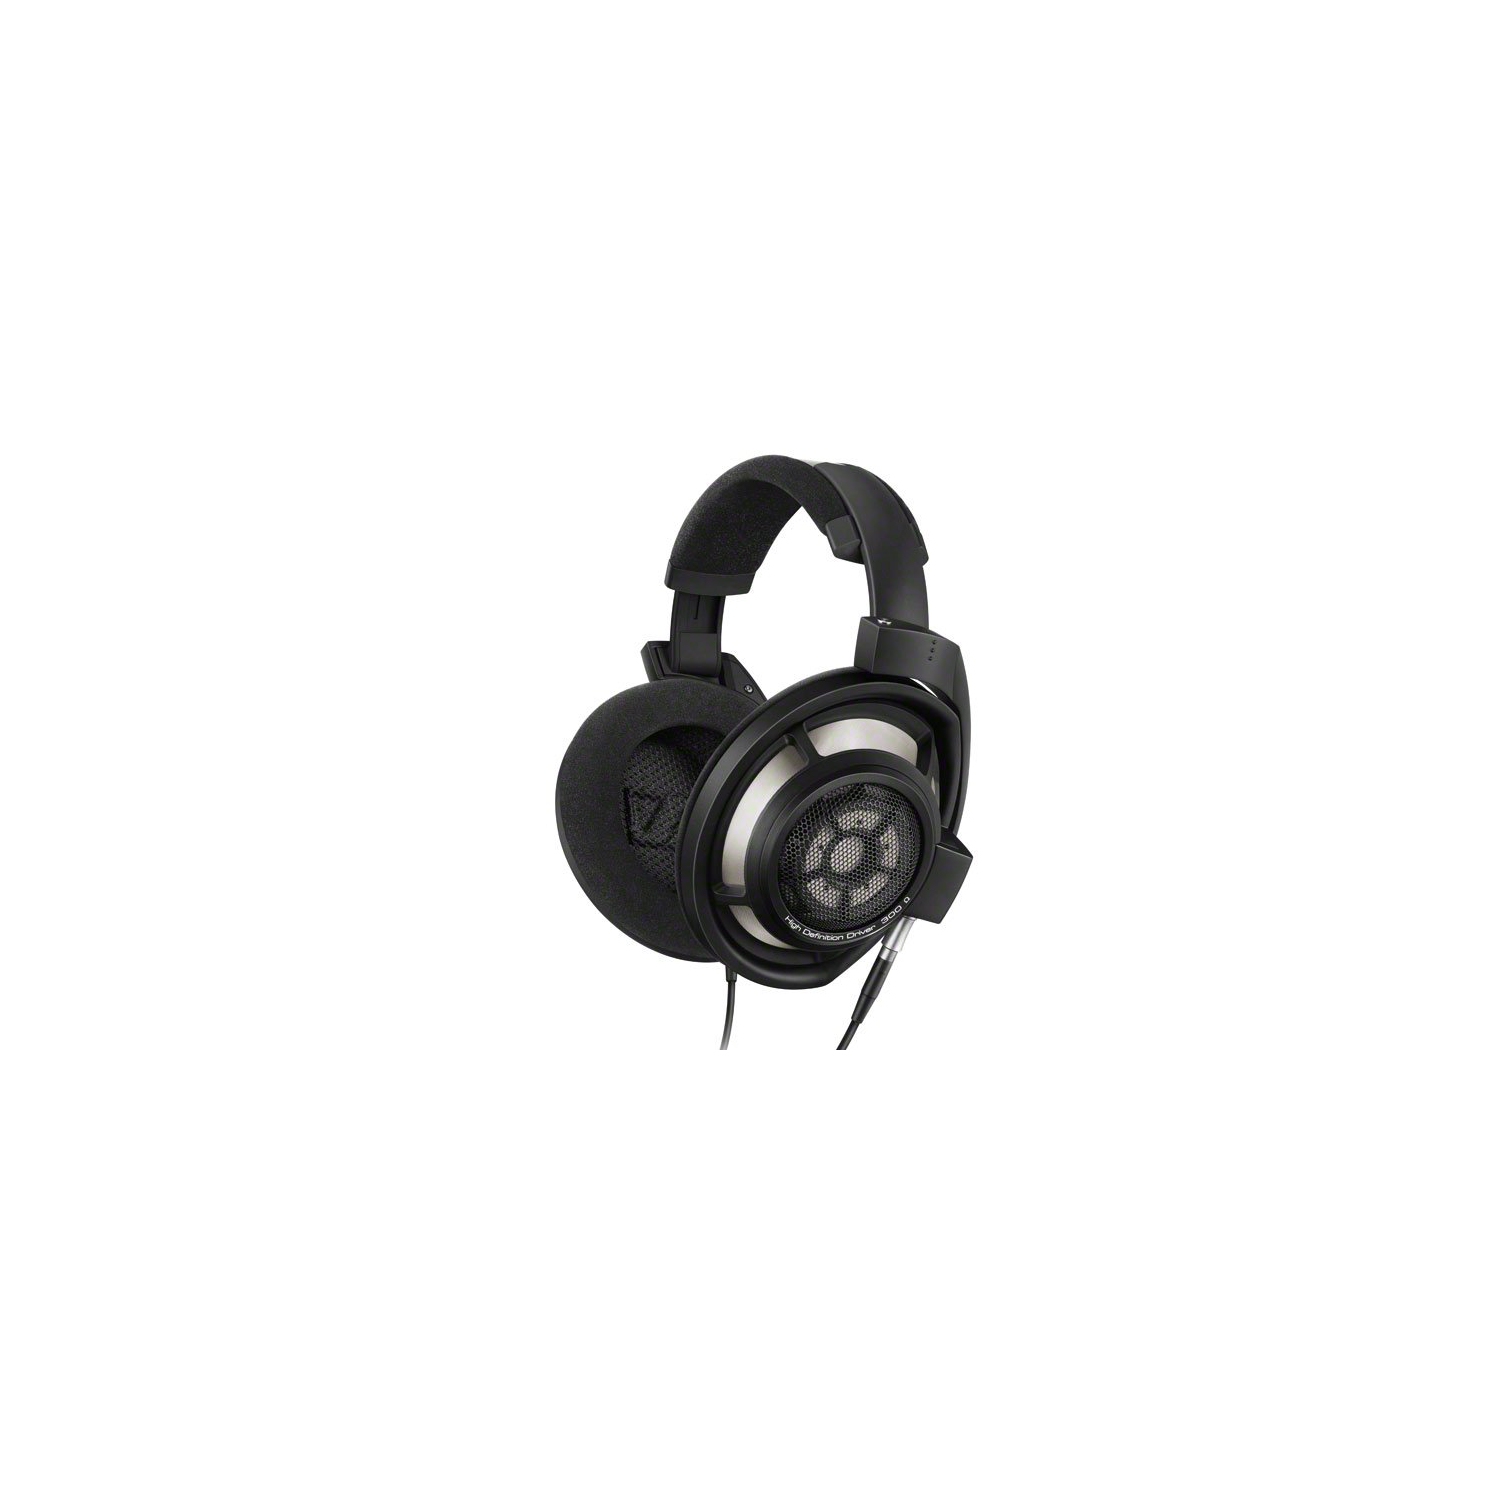 Sennheiser HD 800 S Over-the-Ear Audiophile Reference Headphones - Ring Radiator Drivers With Open-Back Earcups, Includes Balanced Cable, 2-Year Warranty